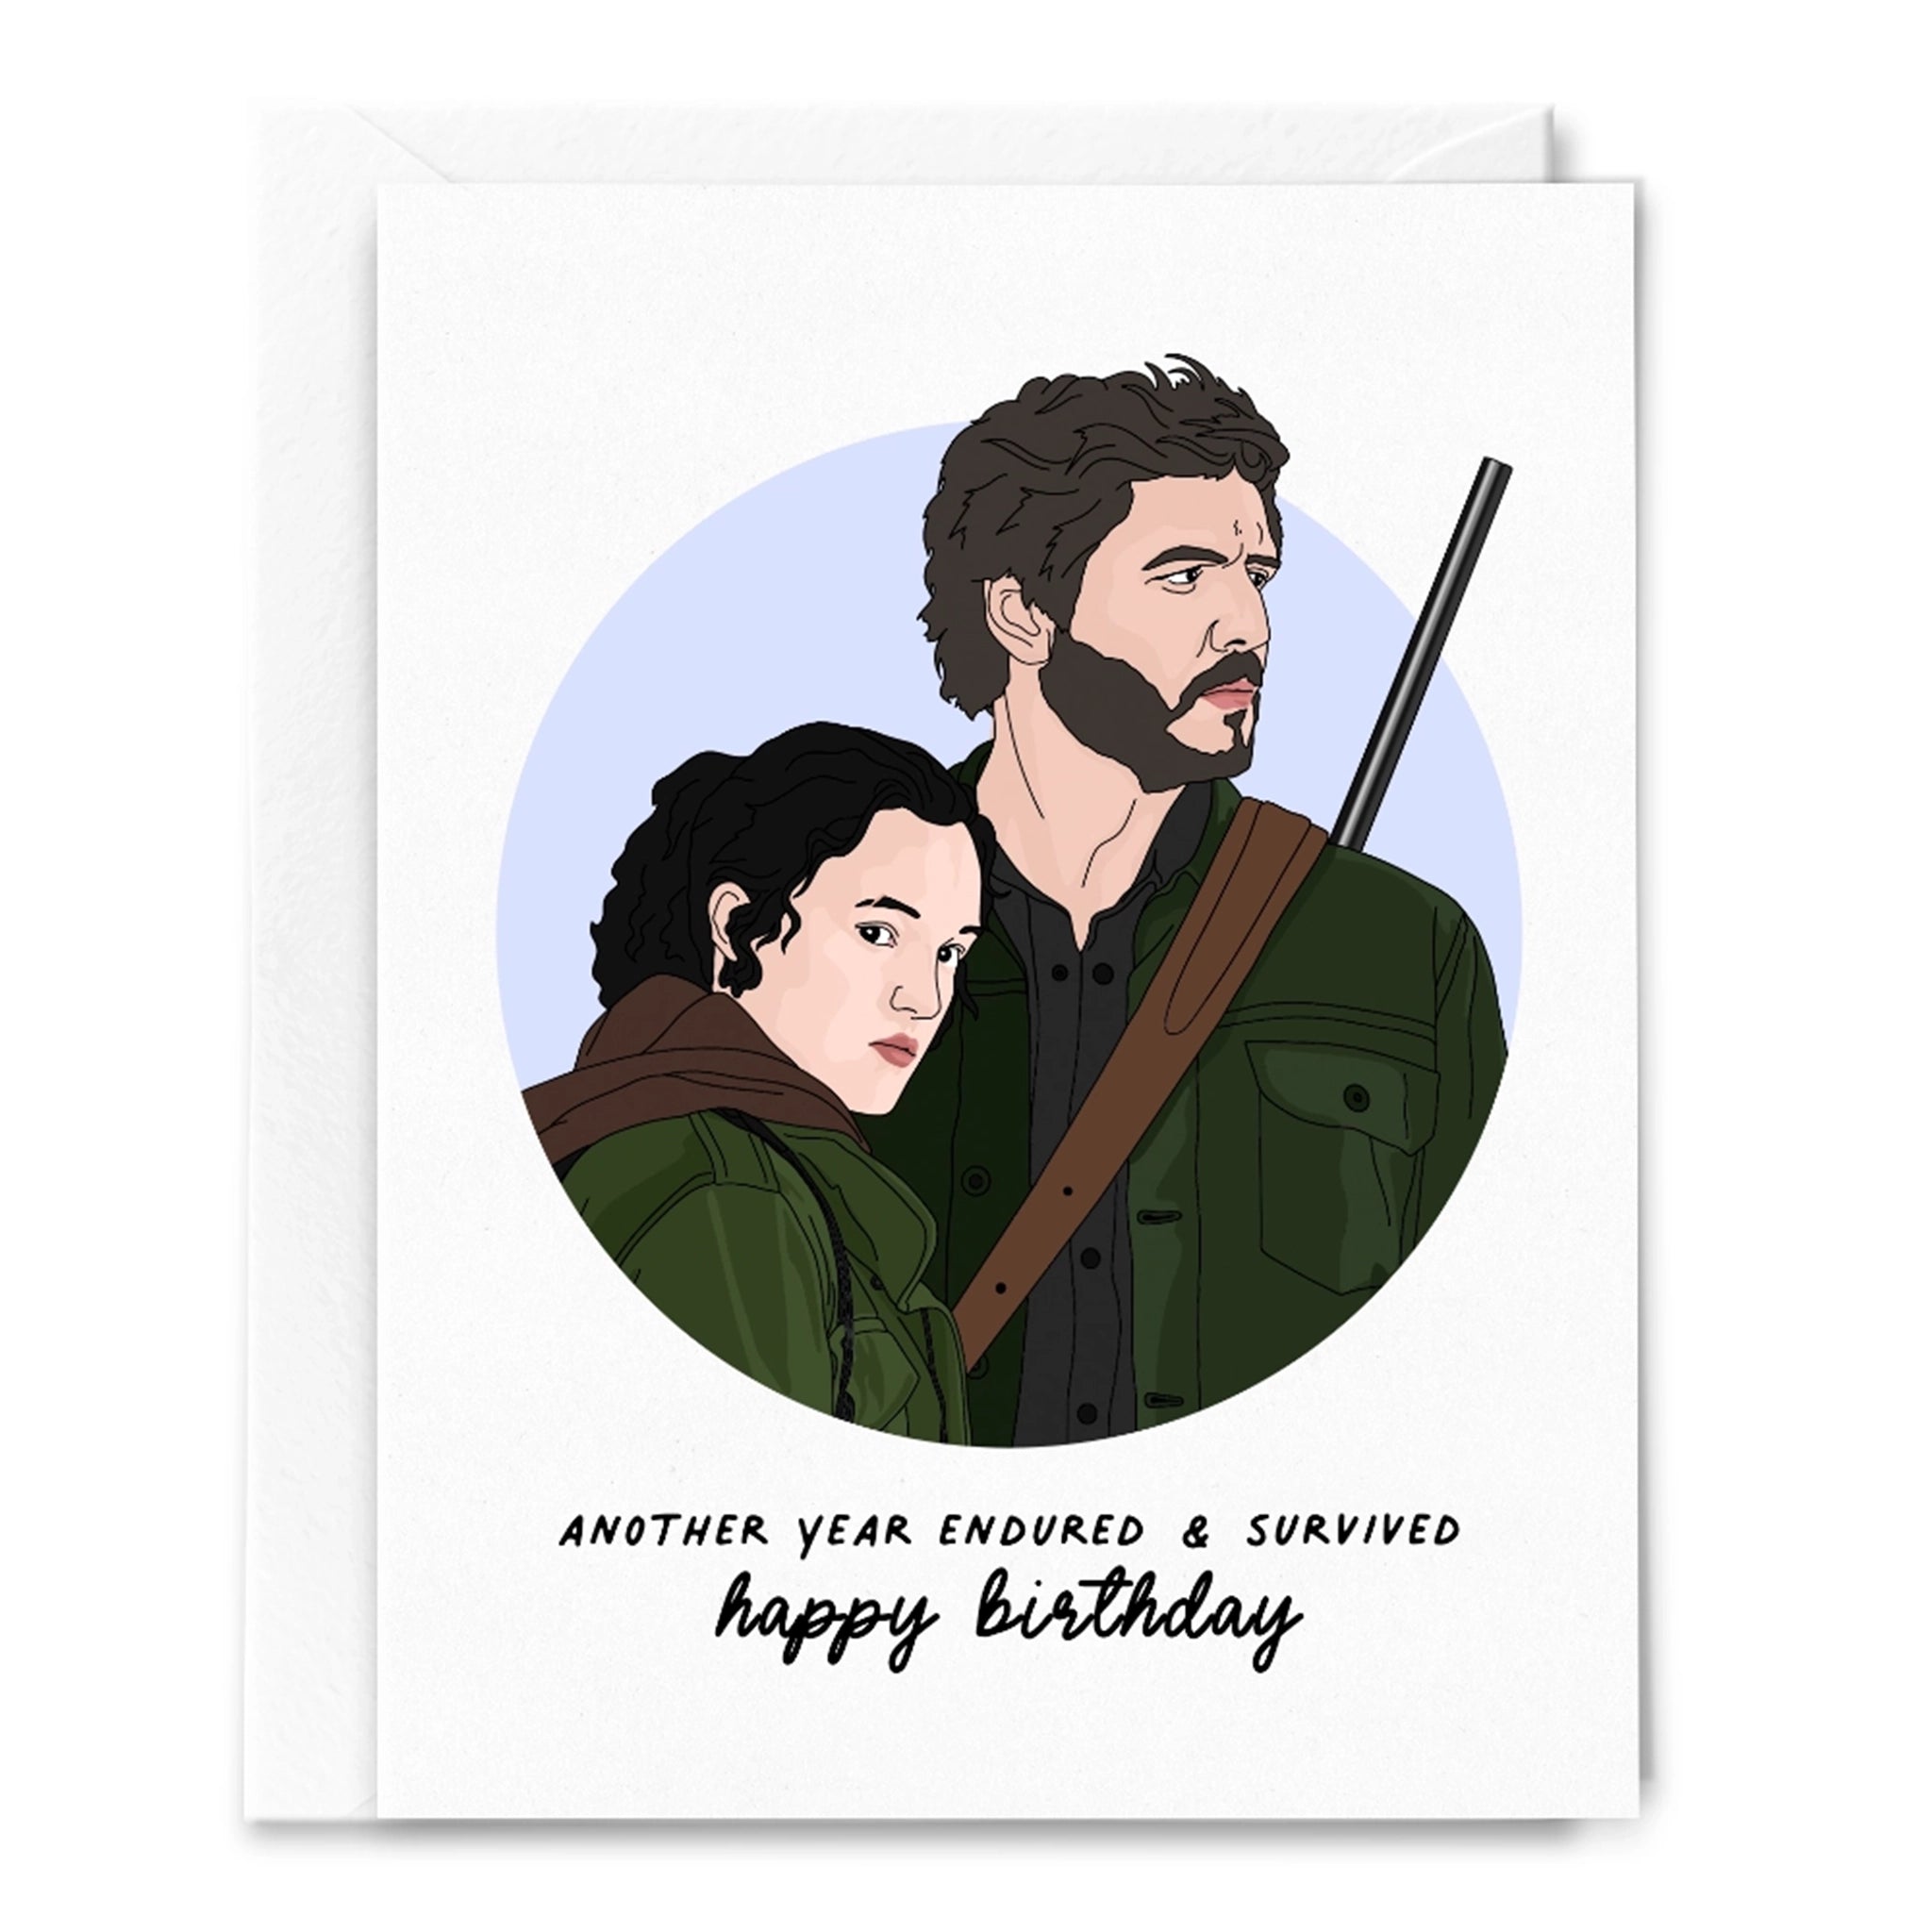 On a white background is a white card with an illustration of the main characters of the show along with black text at the bottom that reads, "Another Year Endured & Survived Happy Birthday".